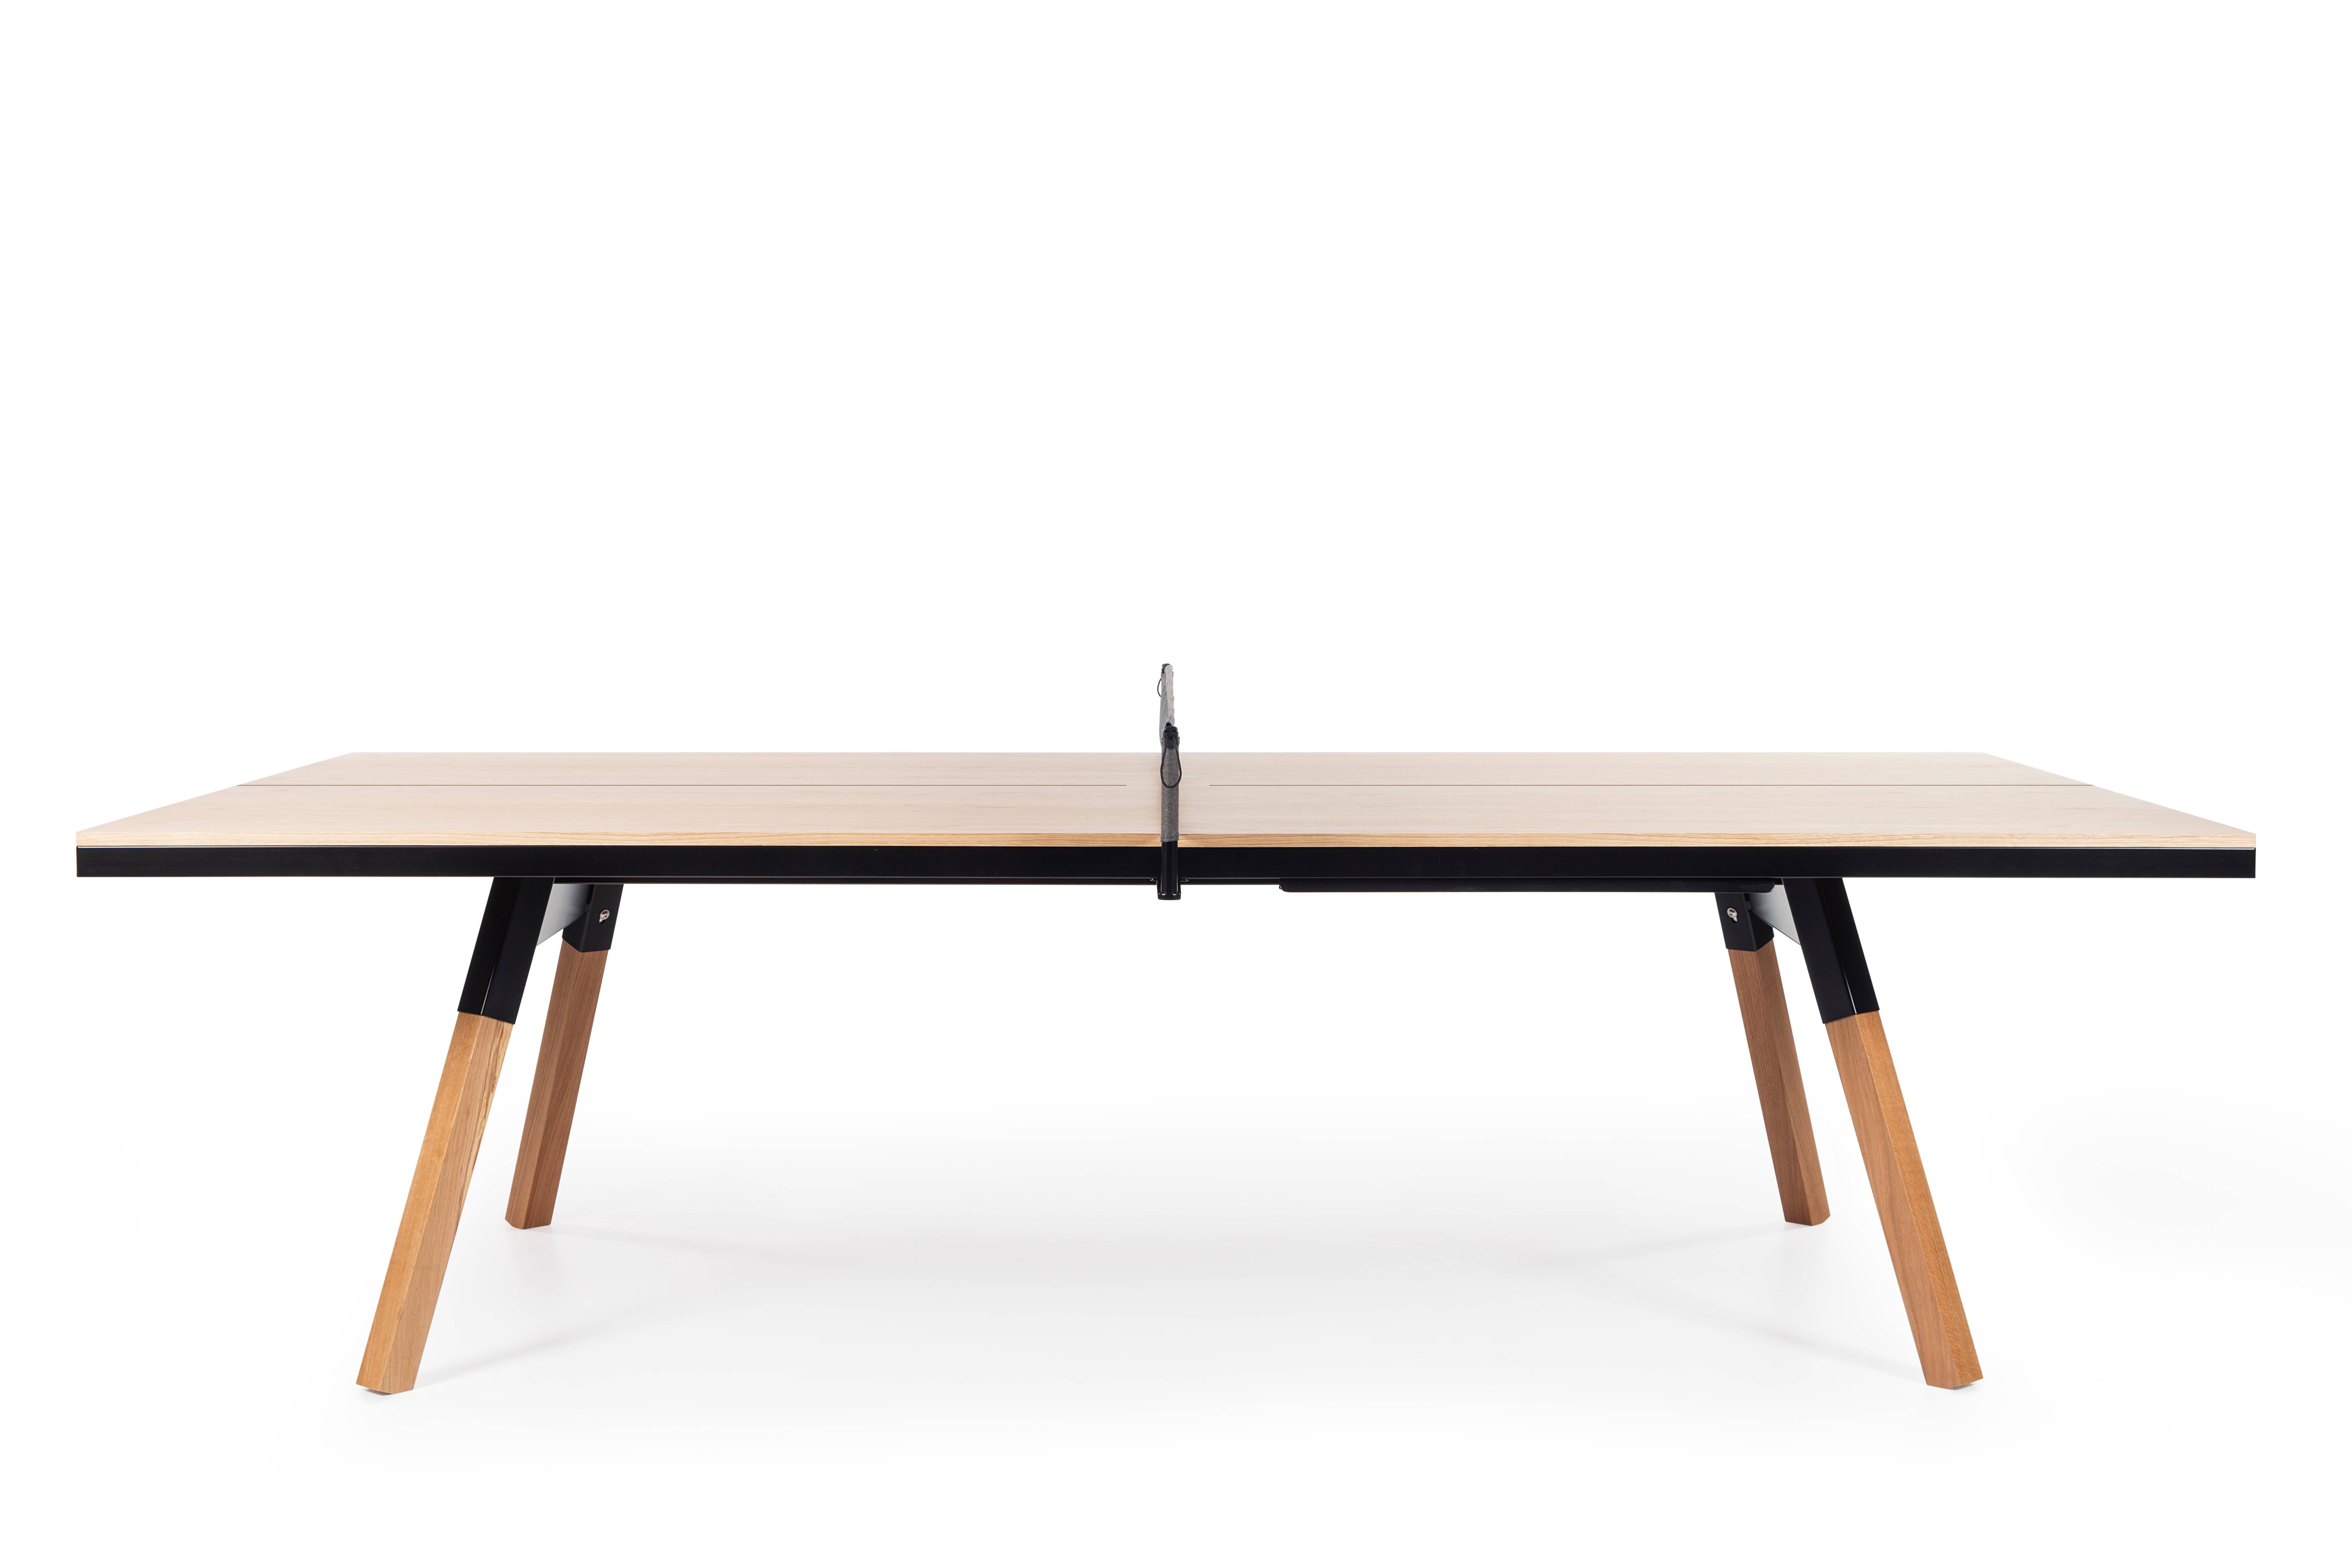 With our wood topped You and Me ping-pong table, we’ve taken our playful attitude indoors. Wood offers comfort and elegance, while sportiness blends in seamlessly in new settings. There’s a place for everything with a You and Me. There’s a place for